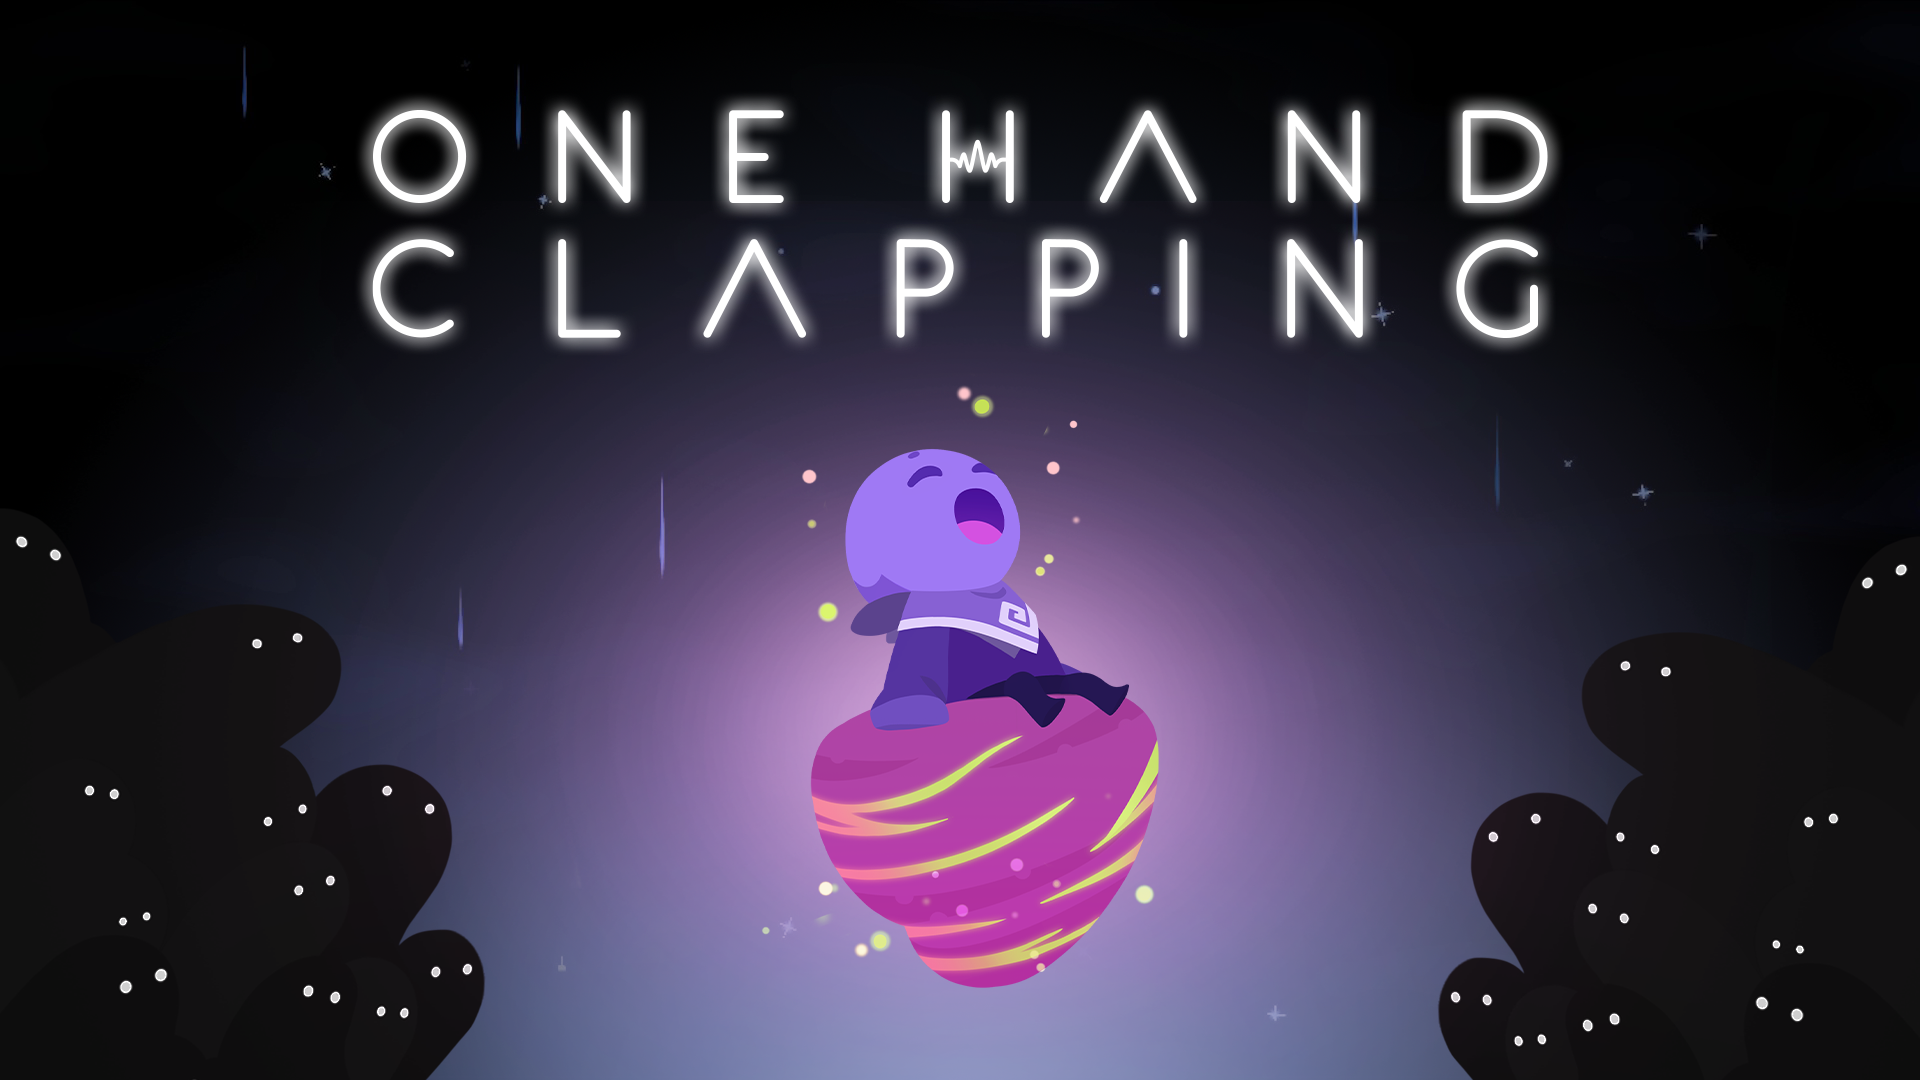 One Hand Clapping by Bad Dream Games